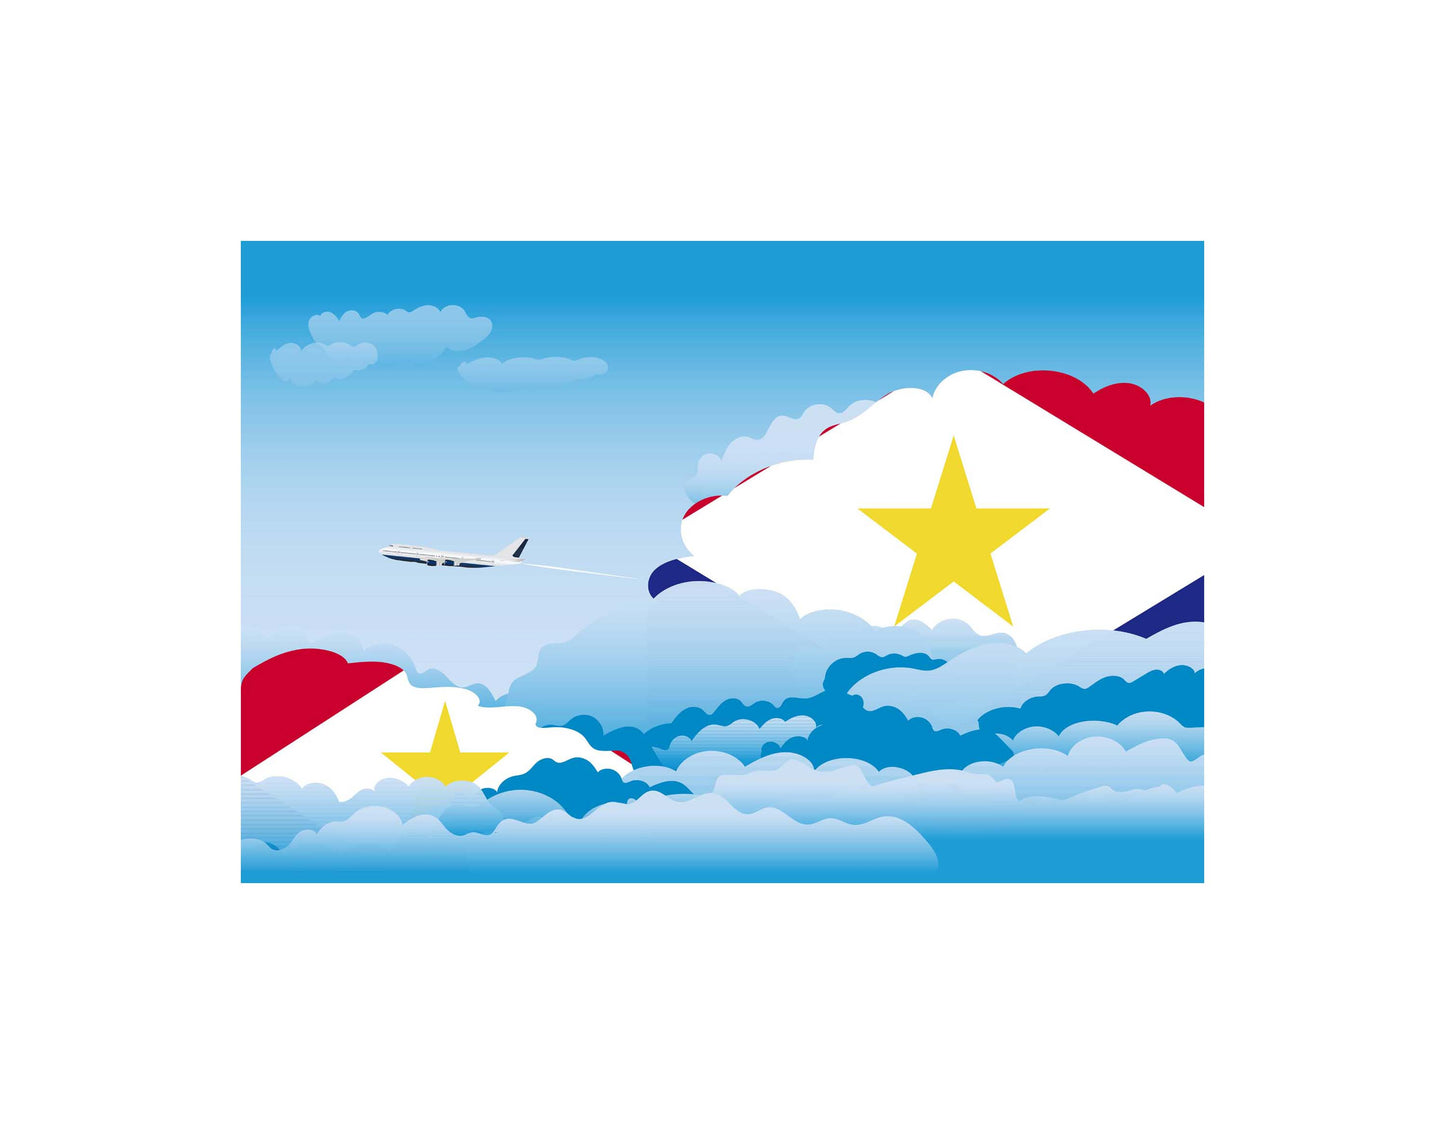 Saba Flag Day Clouds Aeroplane Airport Flying Vector Illustration